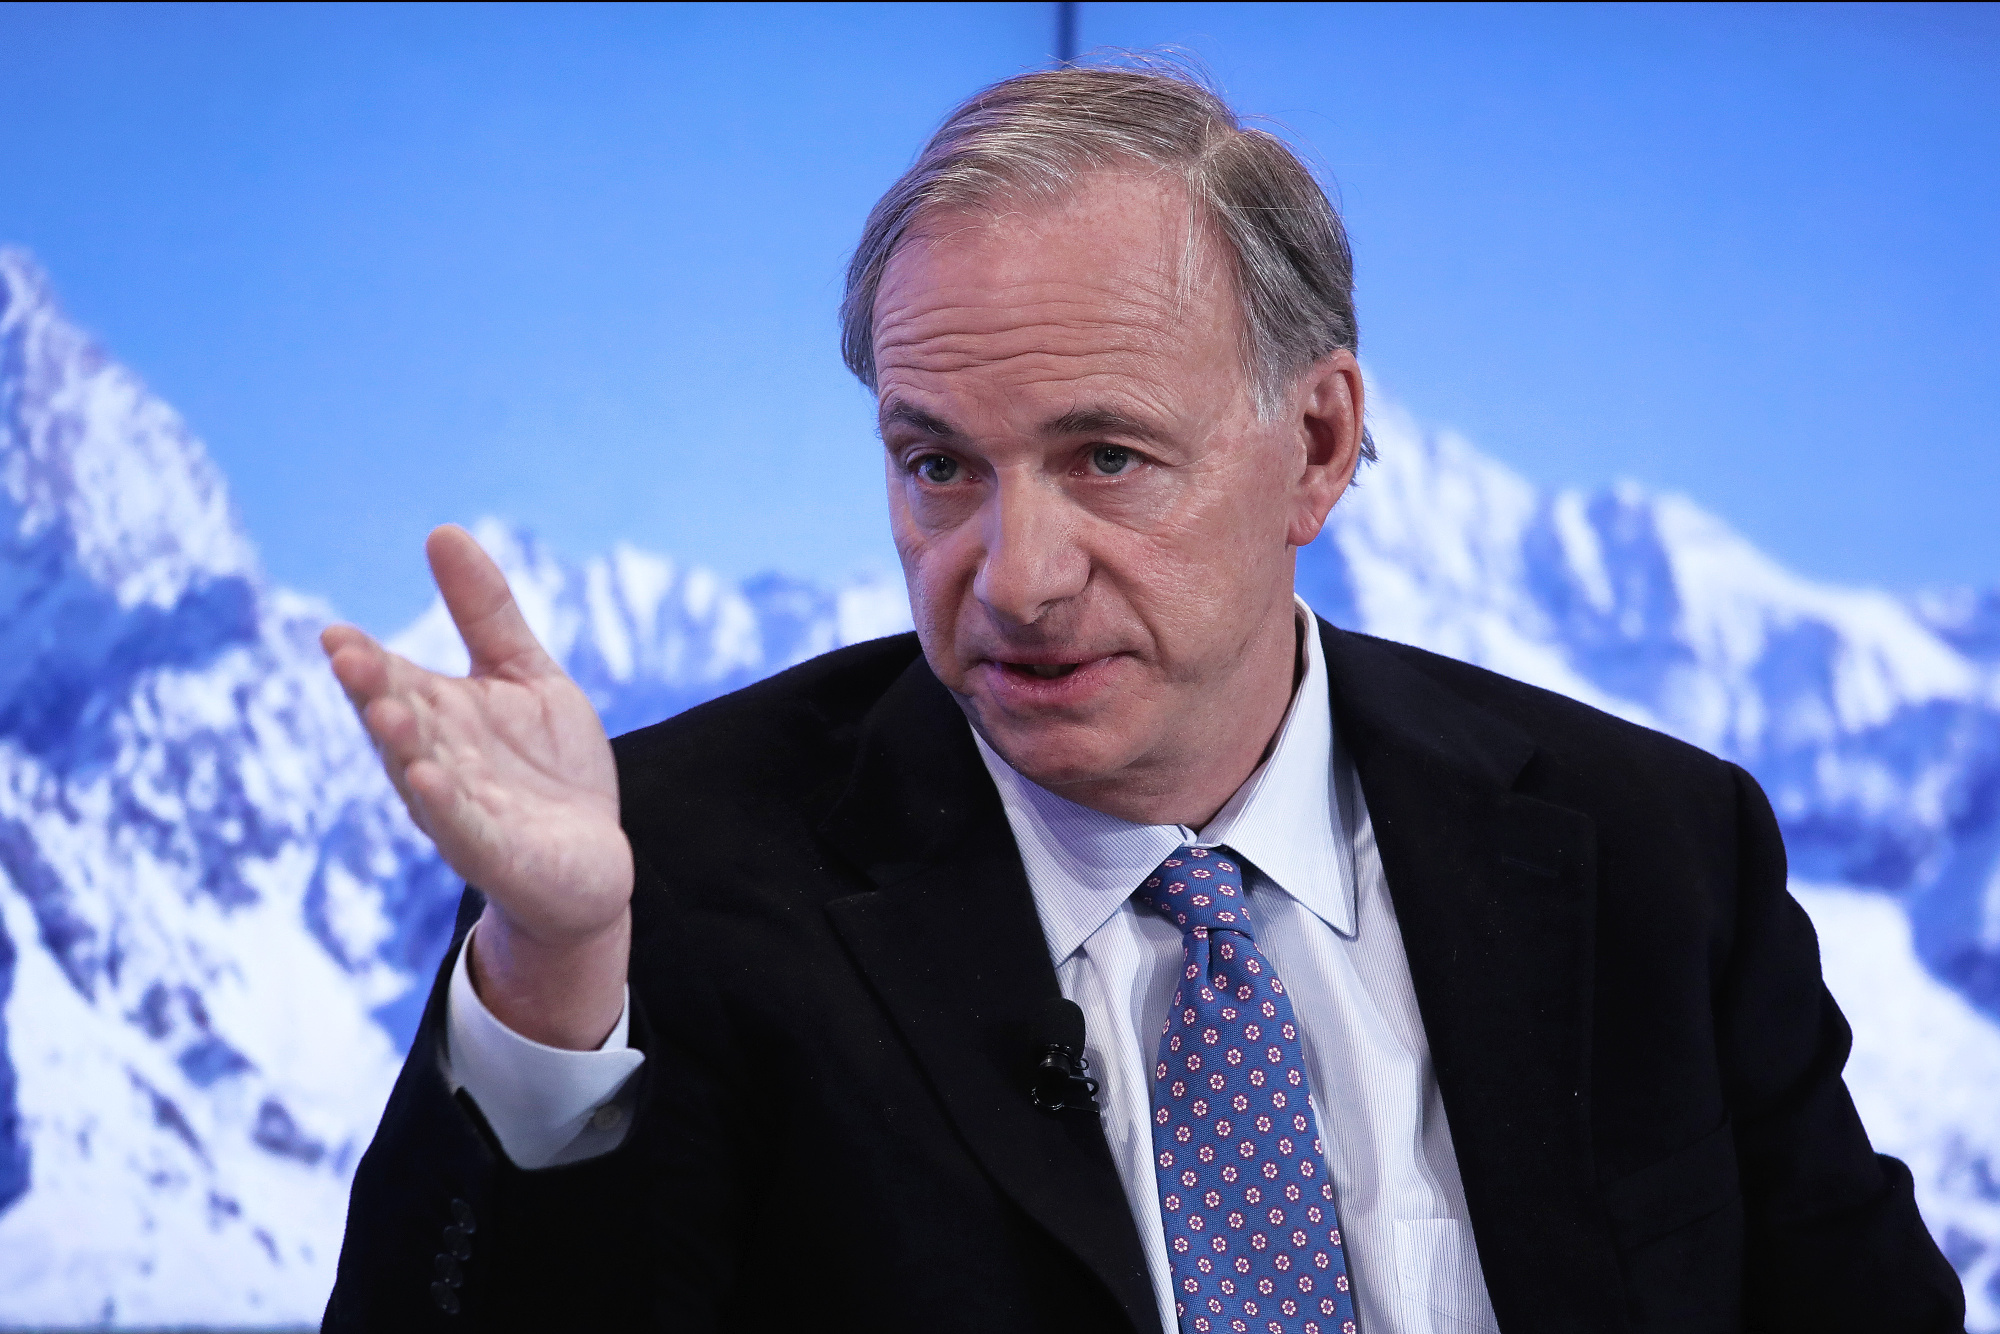 Ray Dalio loves criticism but also judges it rigorously.
